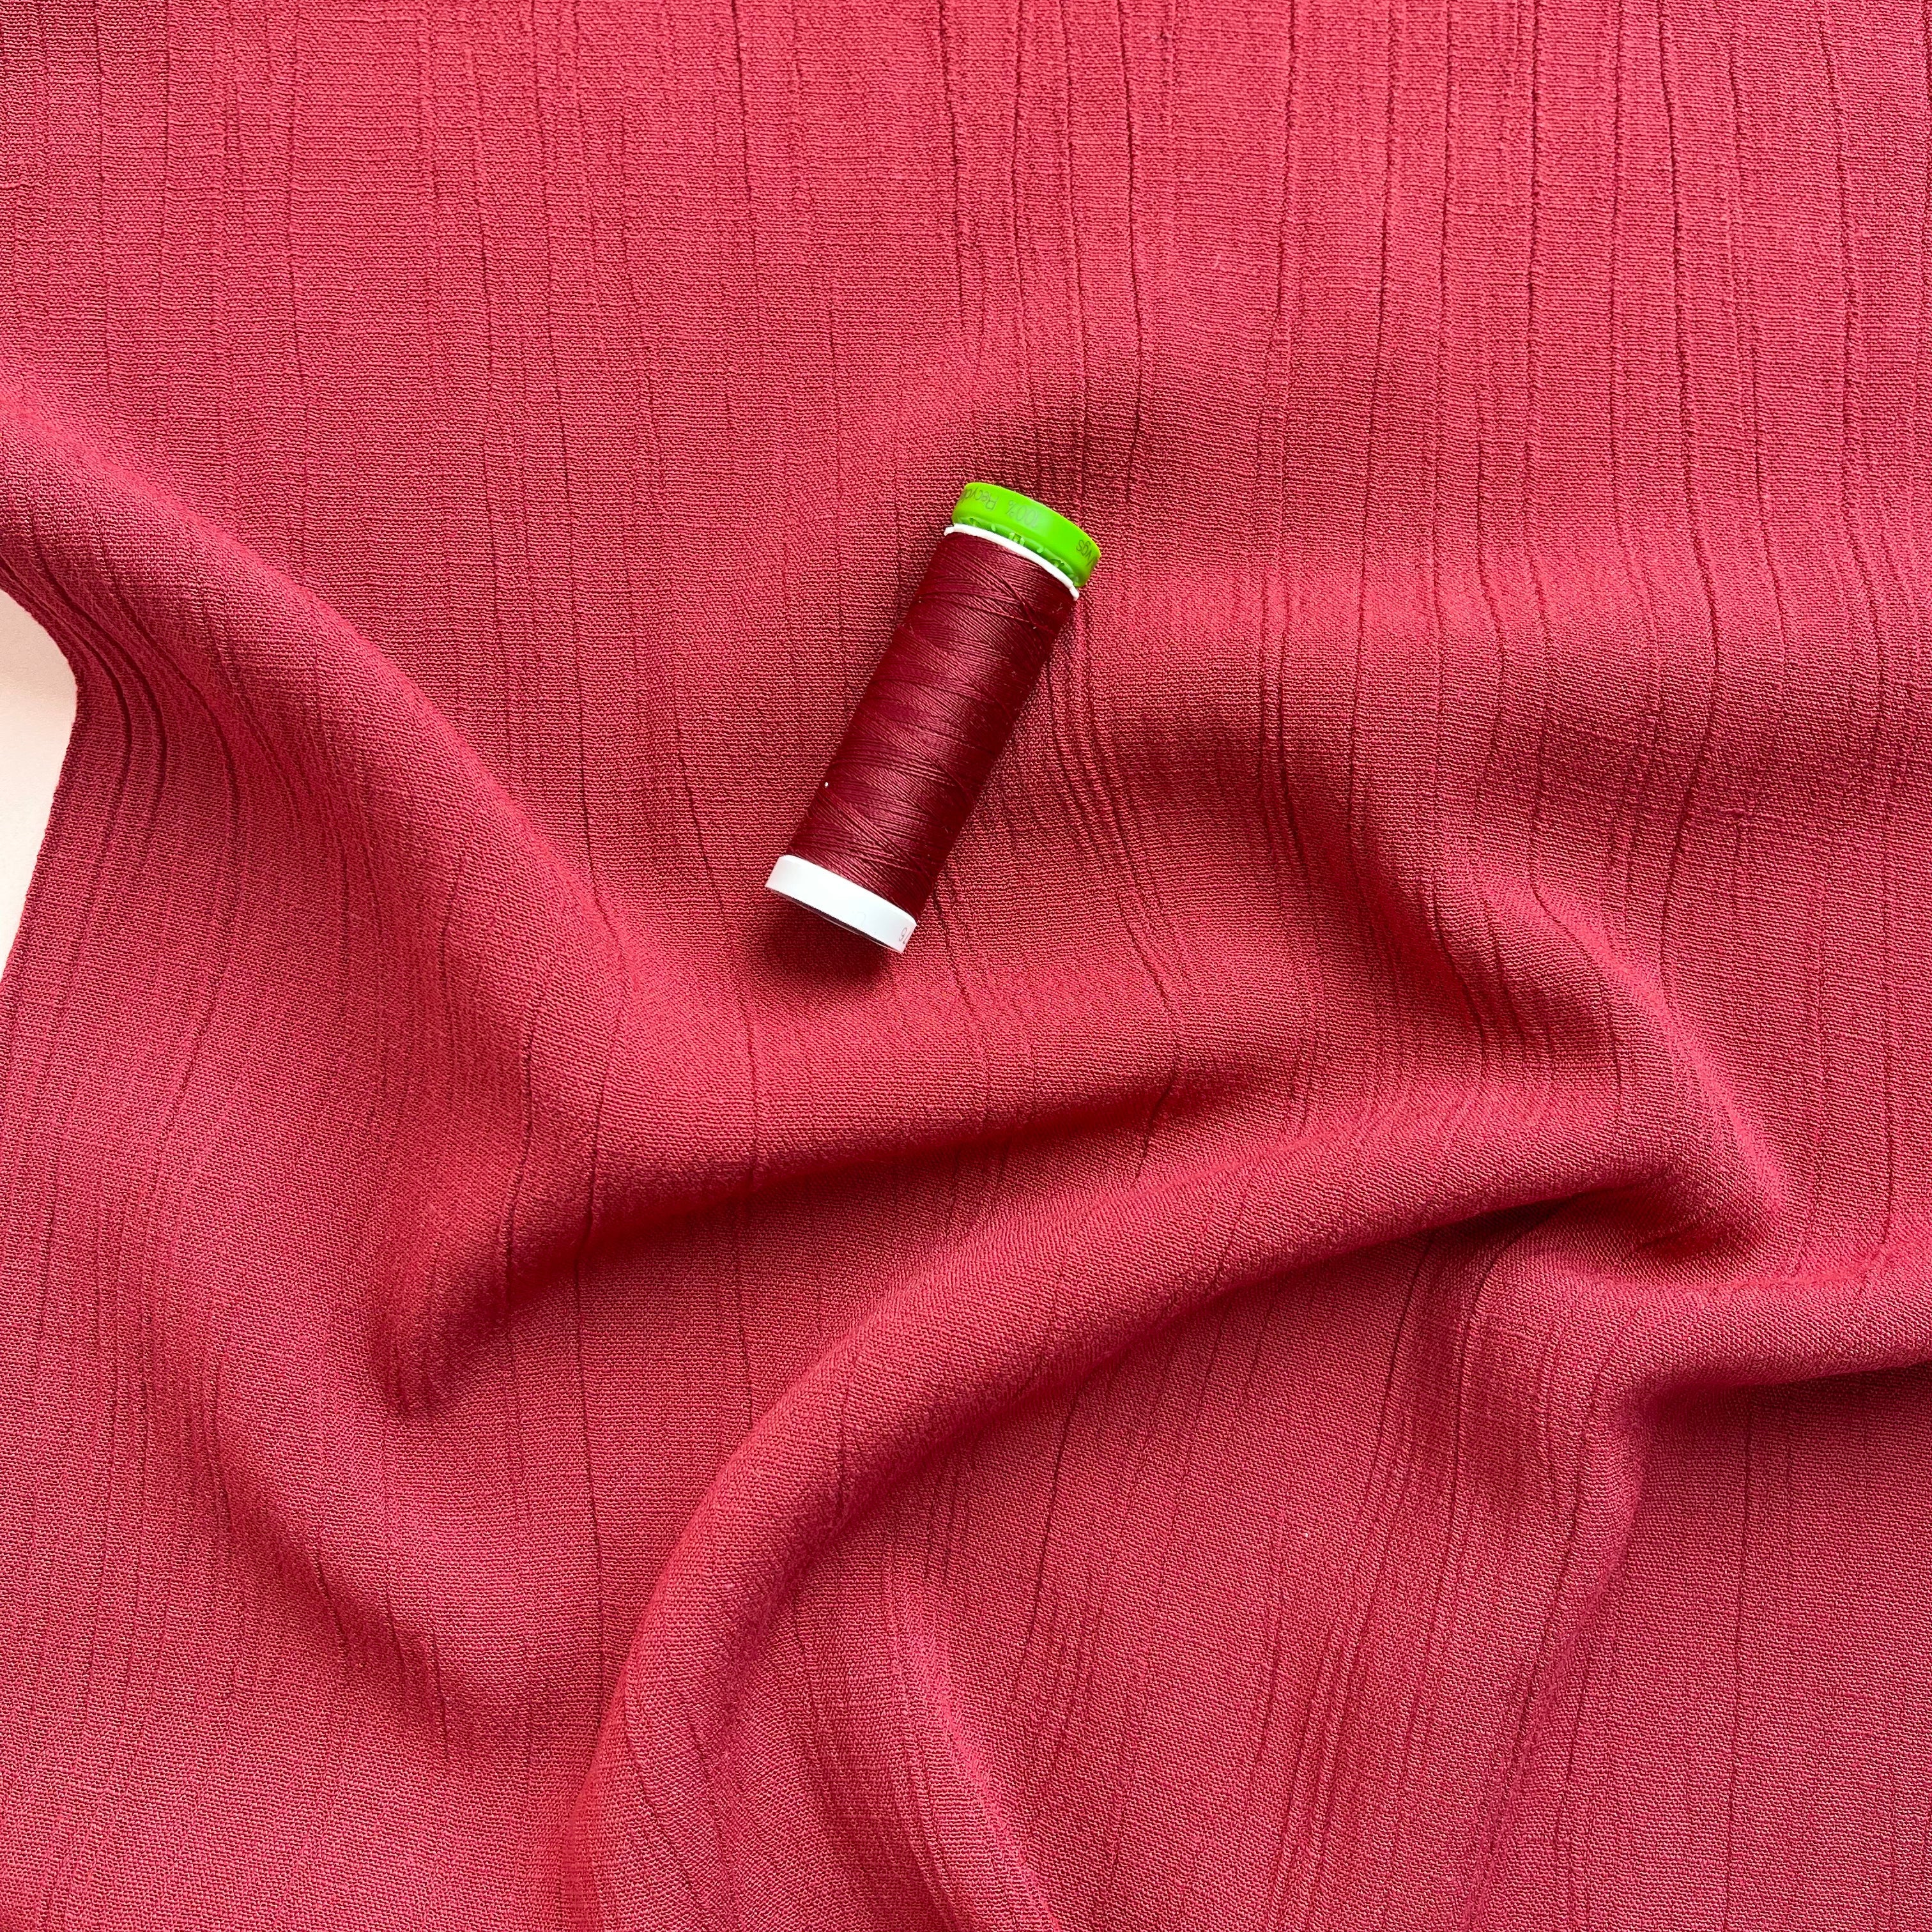 REMNANT 0.32 metre - Crinkle Viscose Linen Blend Fabric in Red